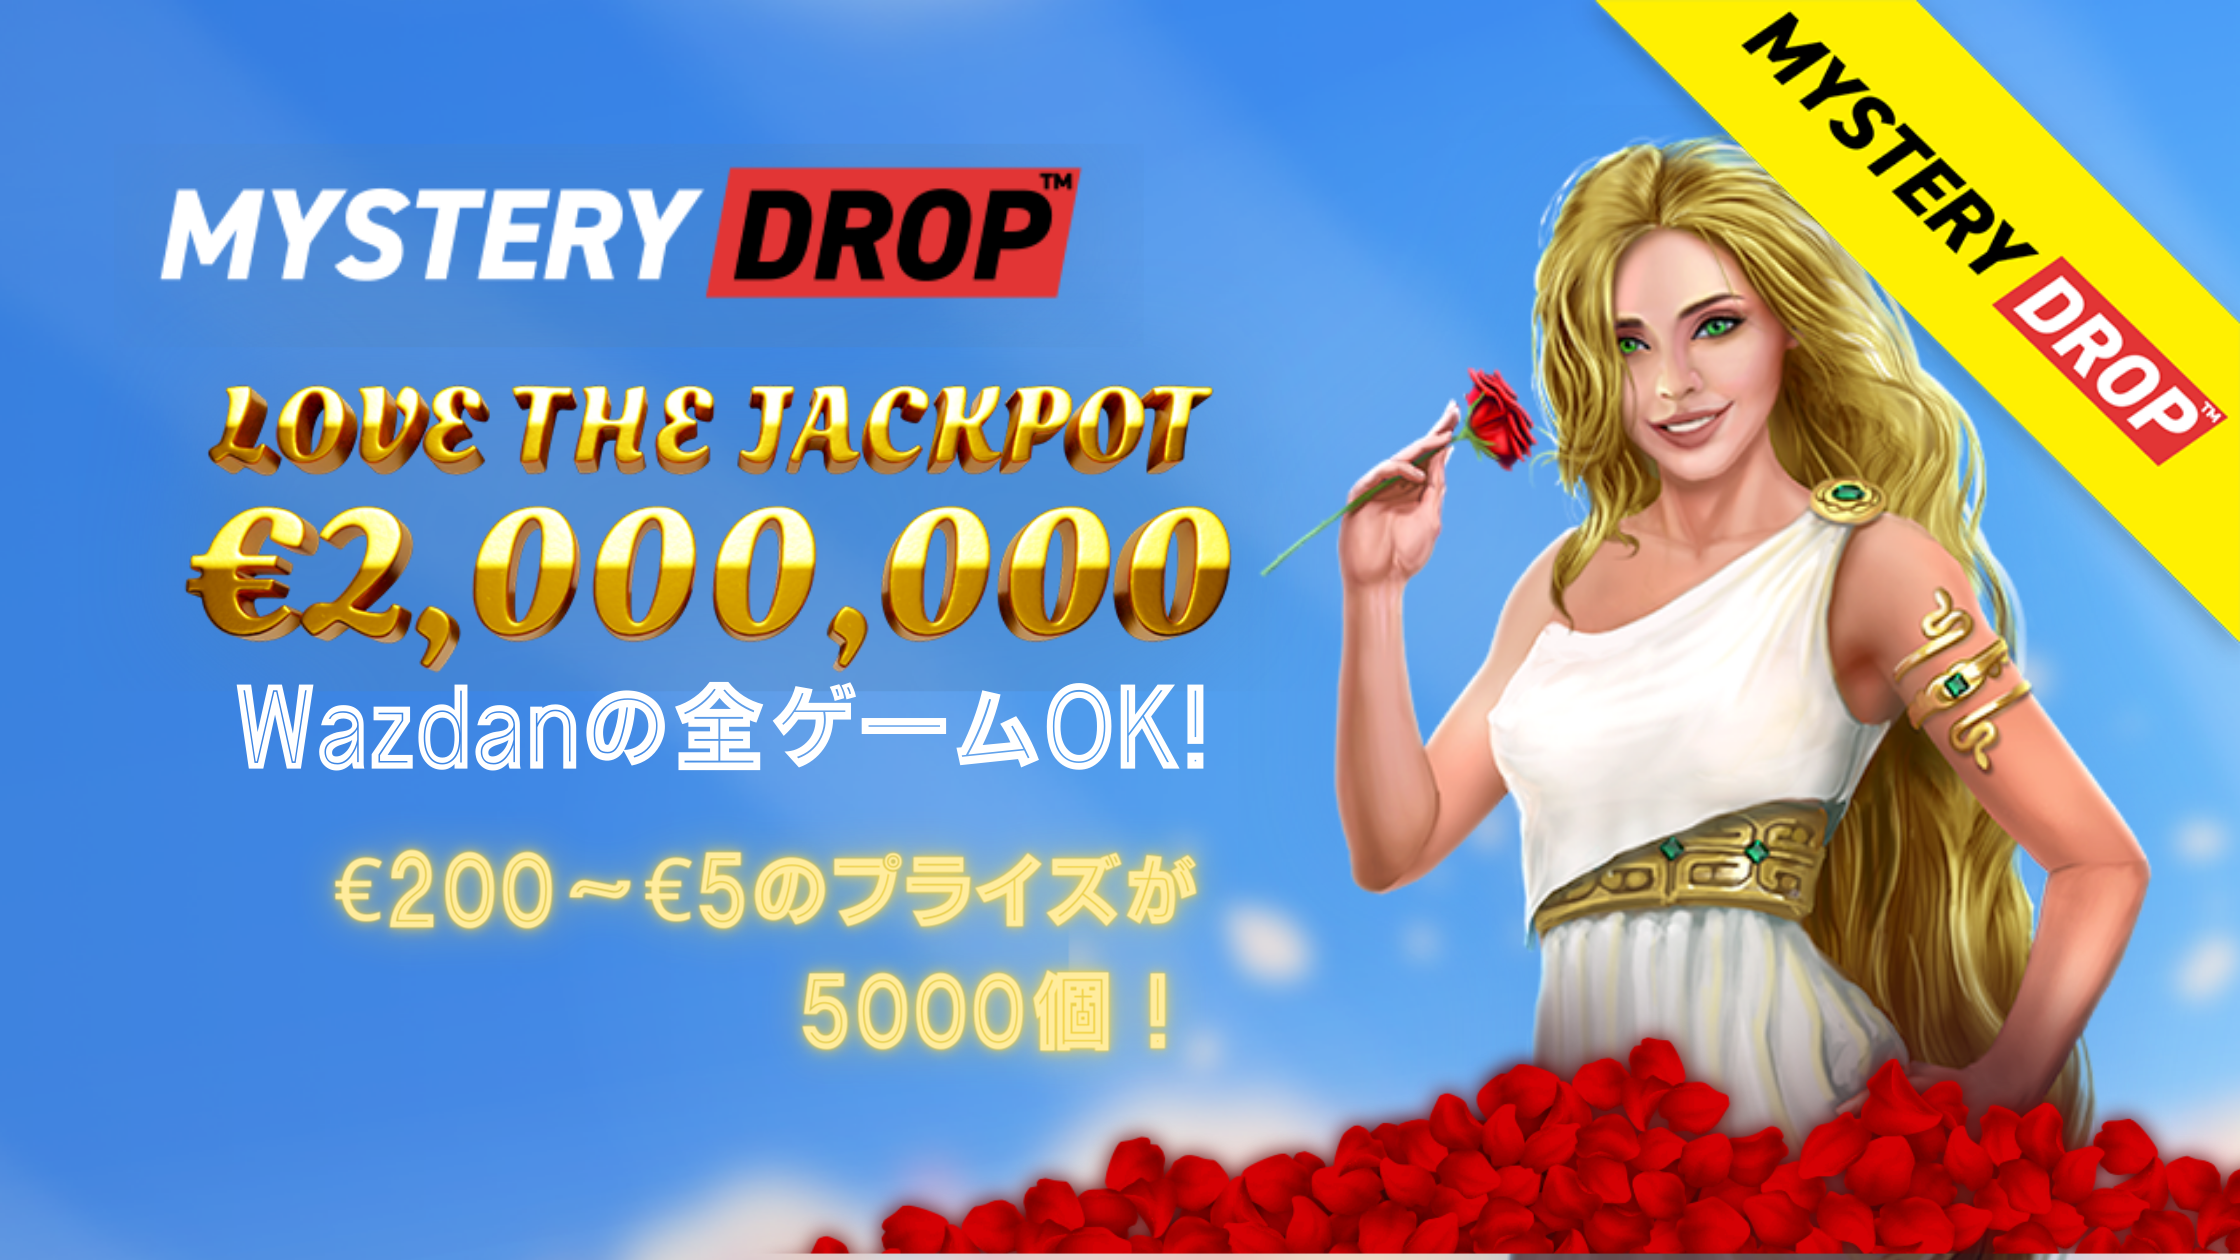 Featured image for “【プロモ】Love the Jackpot”